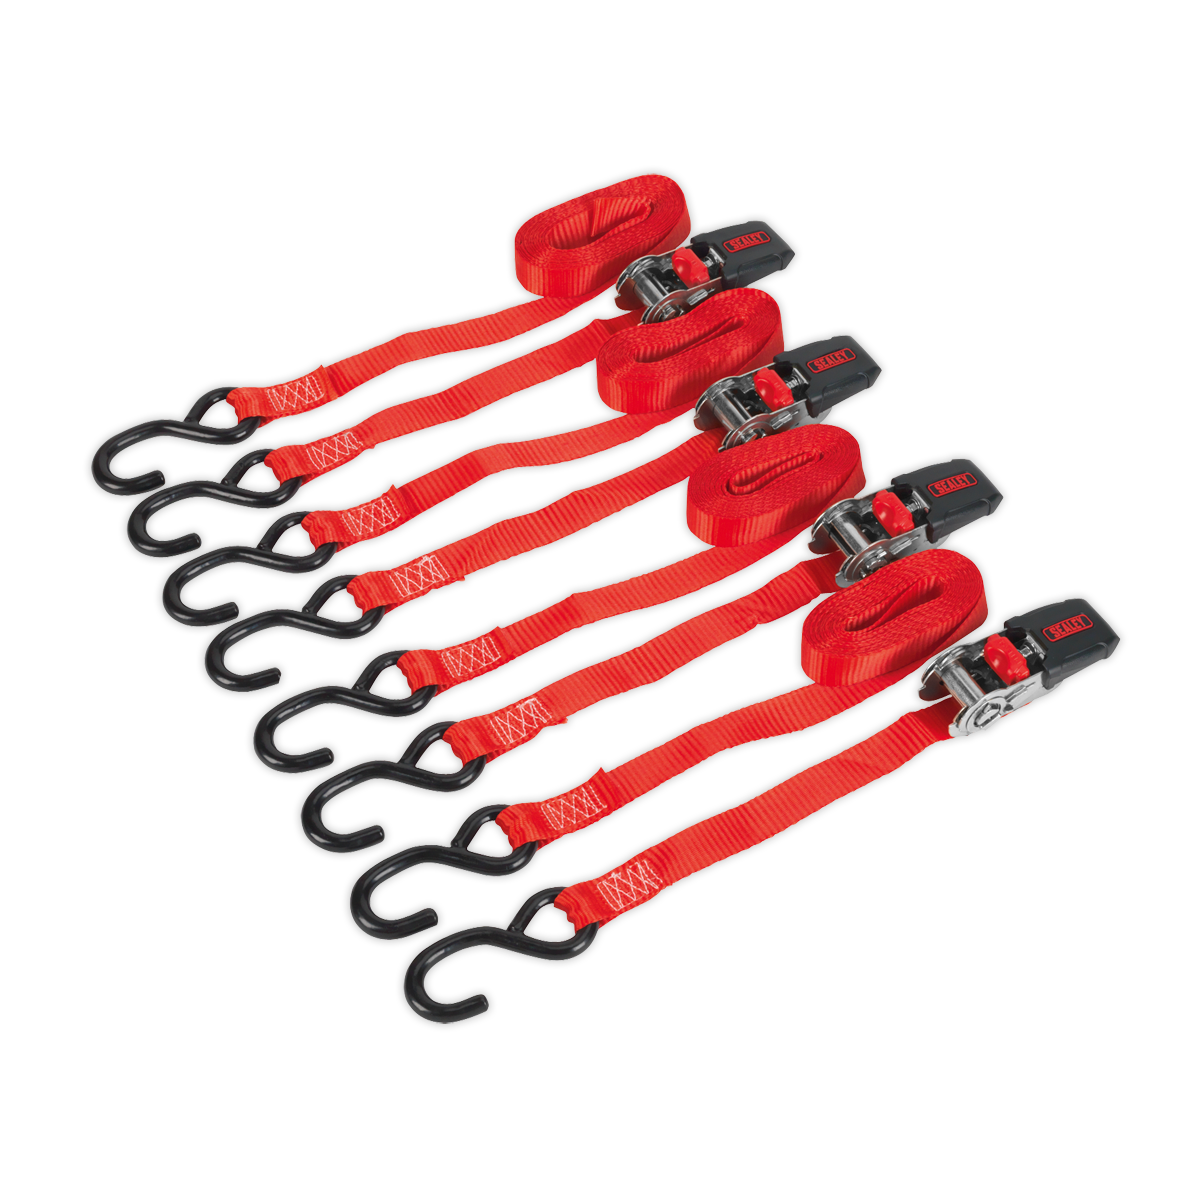 Ratchet Strap 25mm x 4m Polyester Webbing with S-Hooks 800kg Breaking Strength - 2 Pairs - TD484SD - Farming Parts